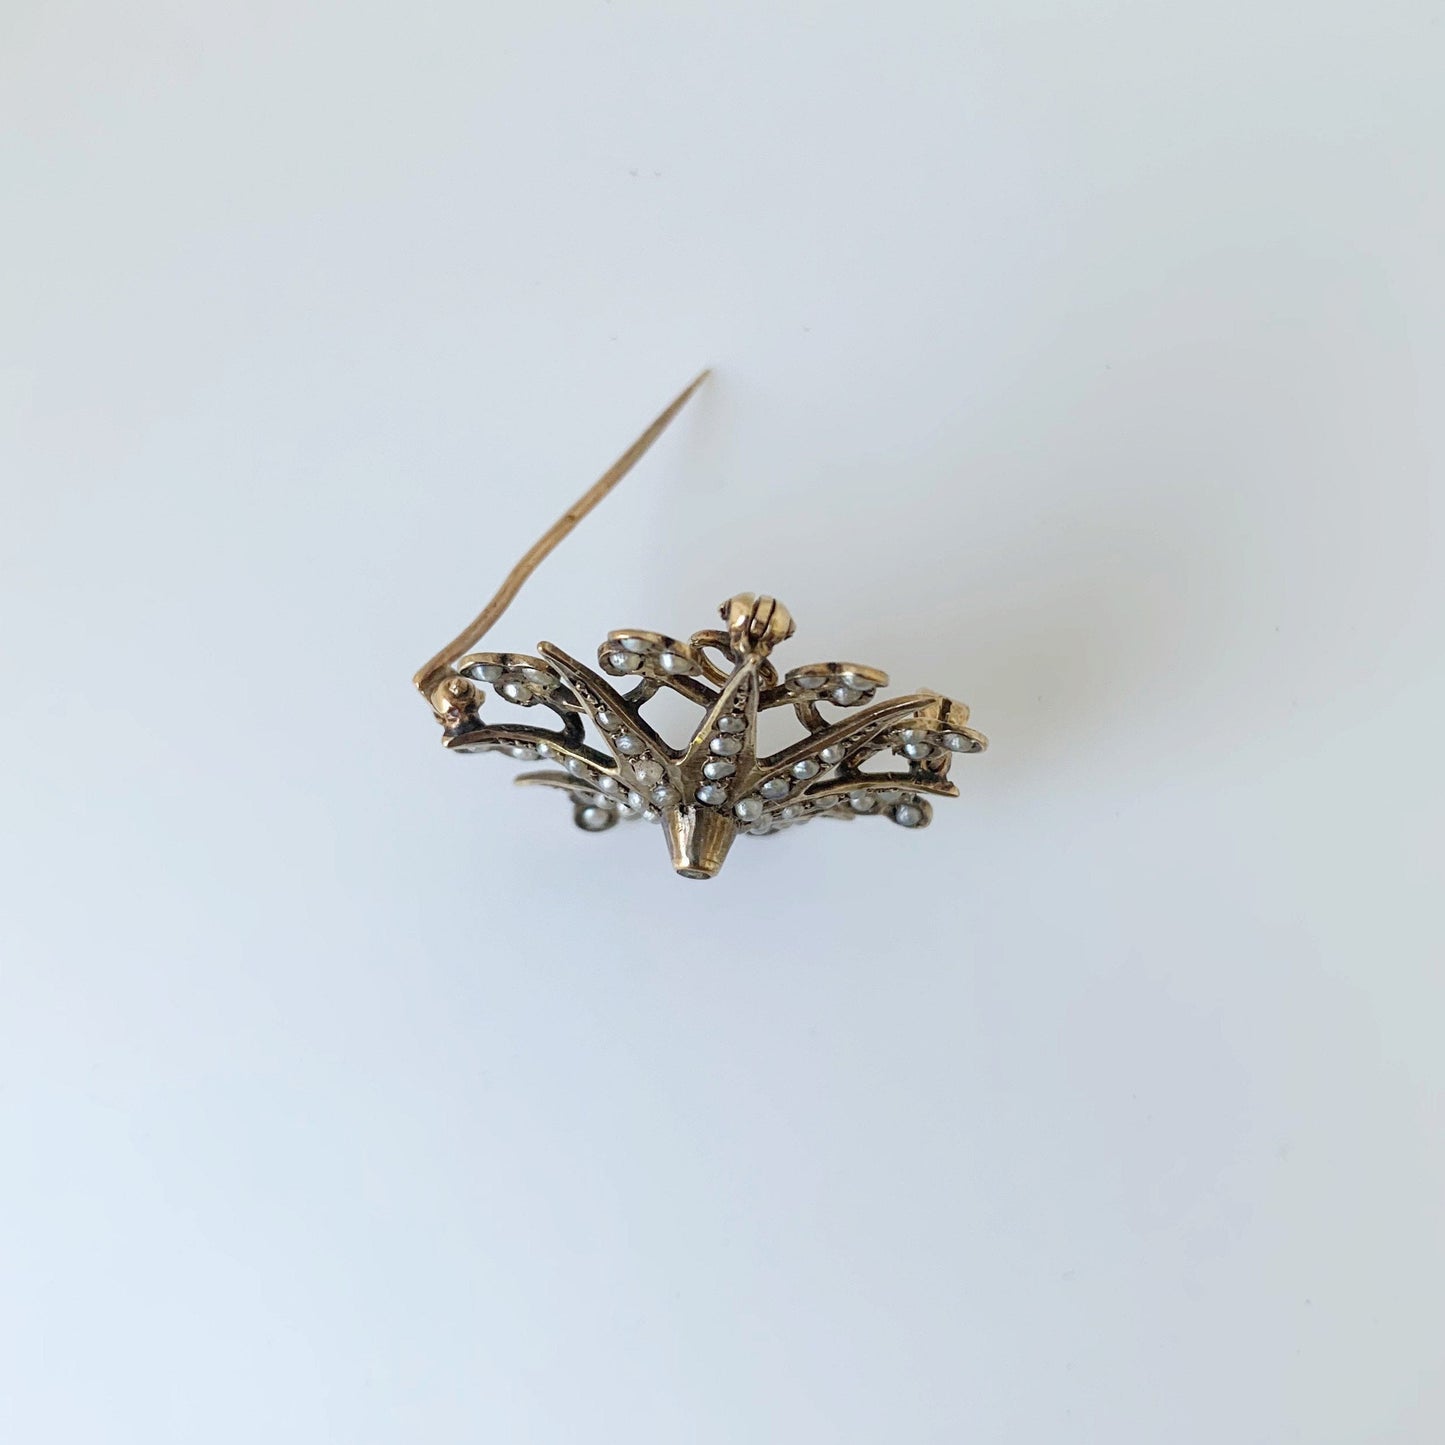 Victorian Seed Pearl Star Brooch | Gold Clover and Star Brooch